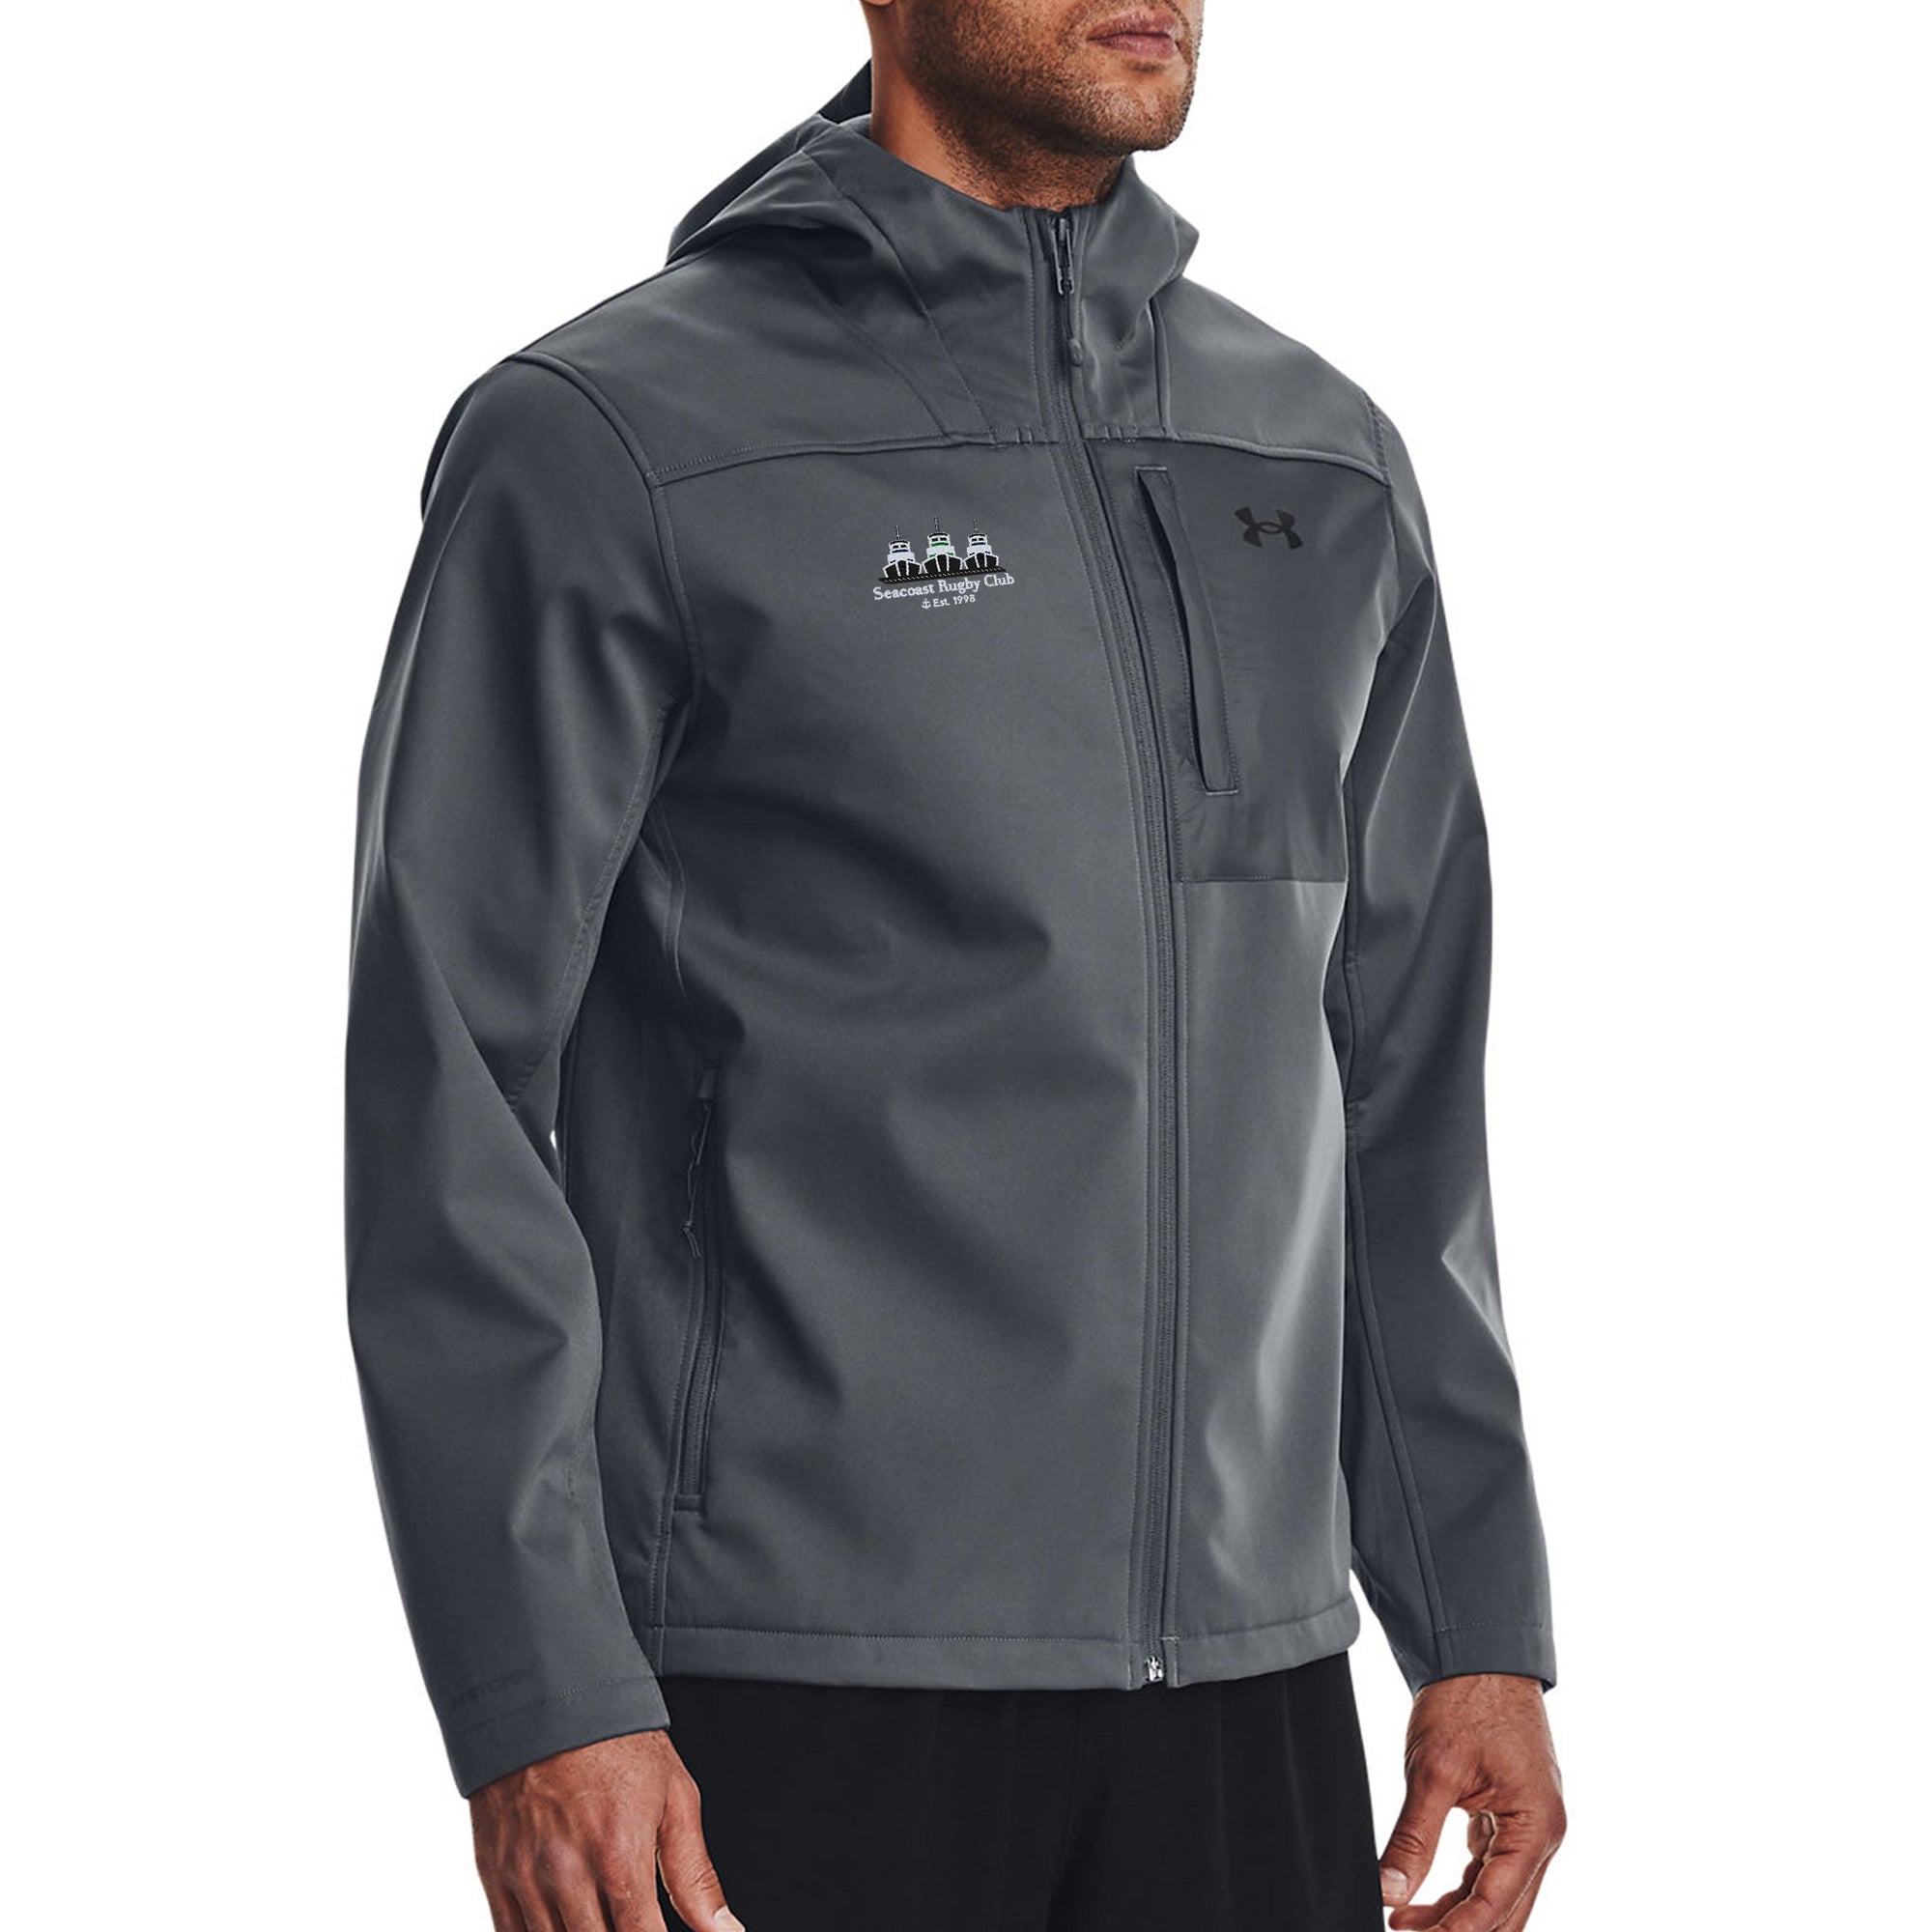 Rugby Imports Seacoast WR Coldgear Hooded Infrared Jacket